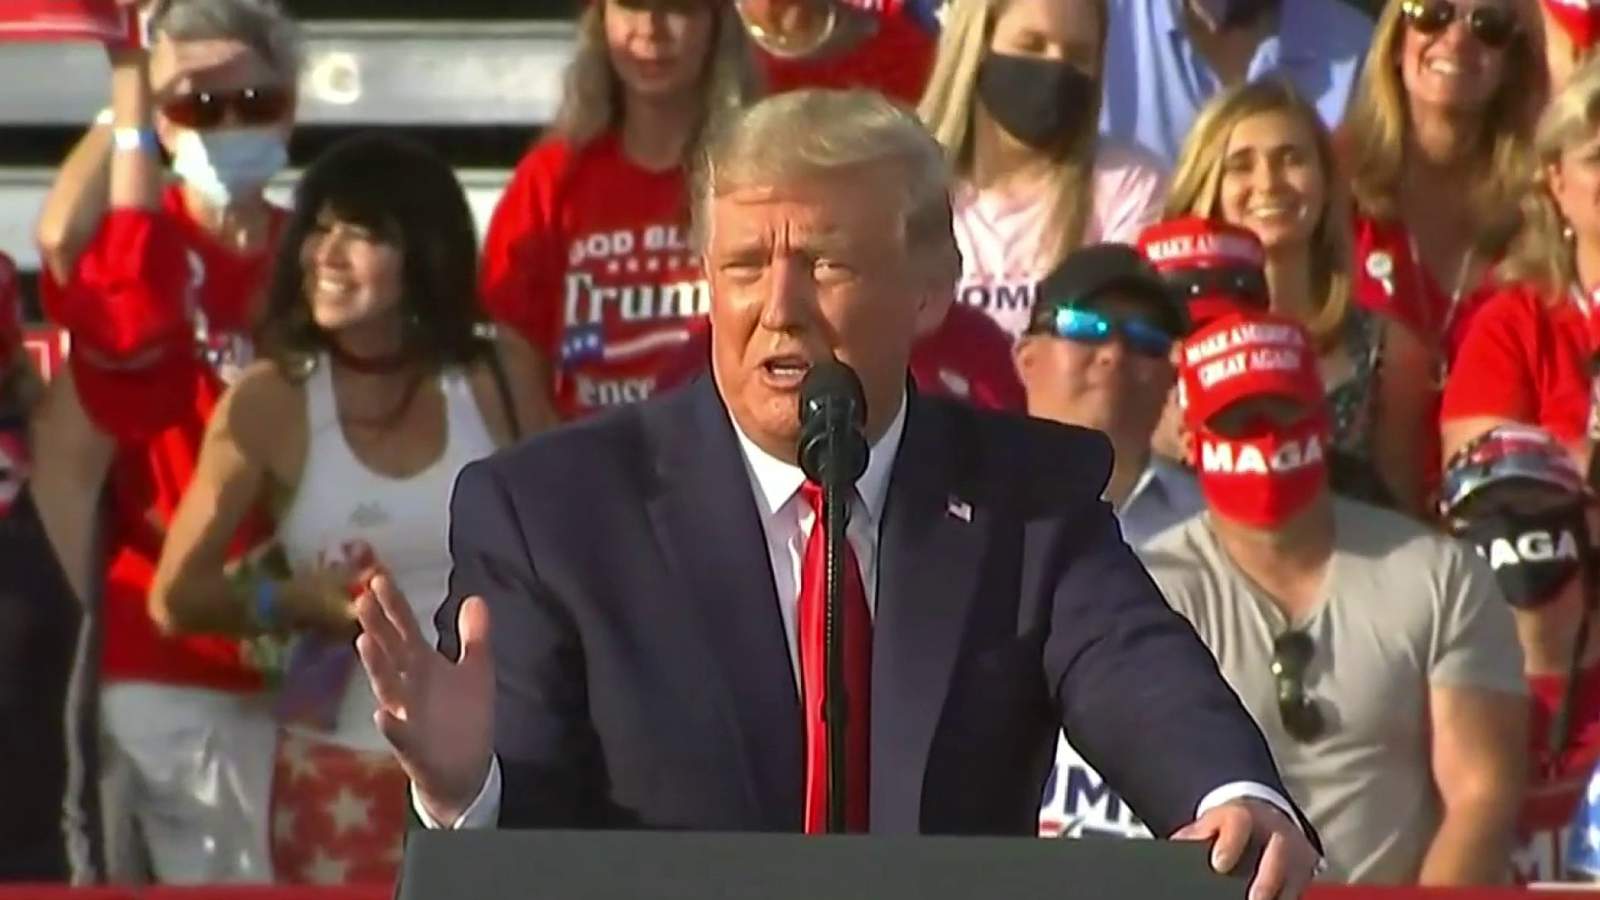 REWATCH: President Trump speaks to supporters in The Villages